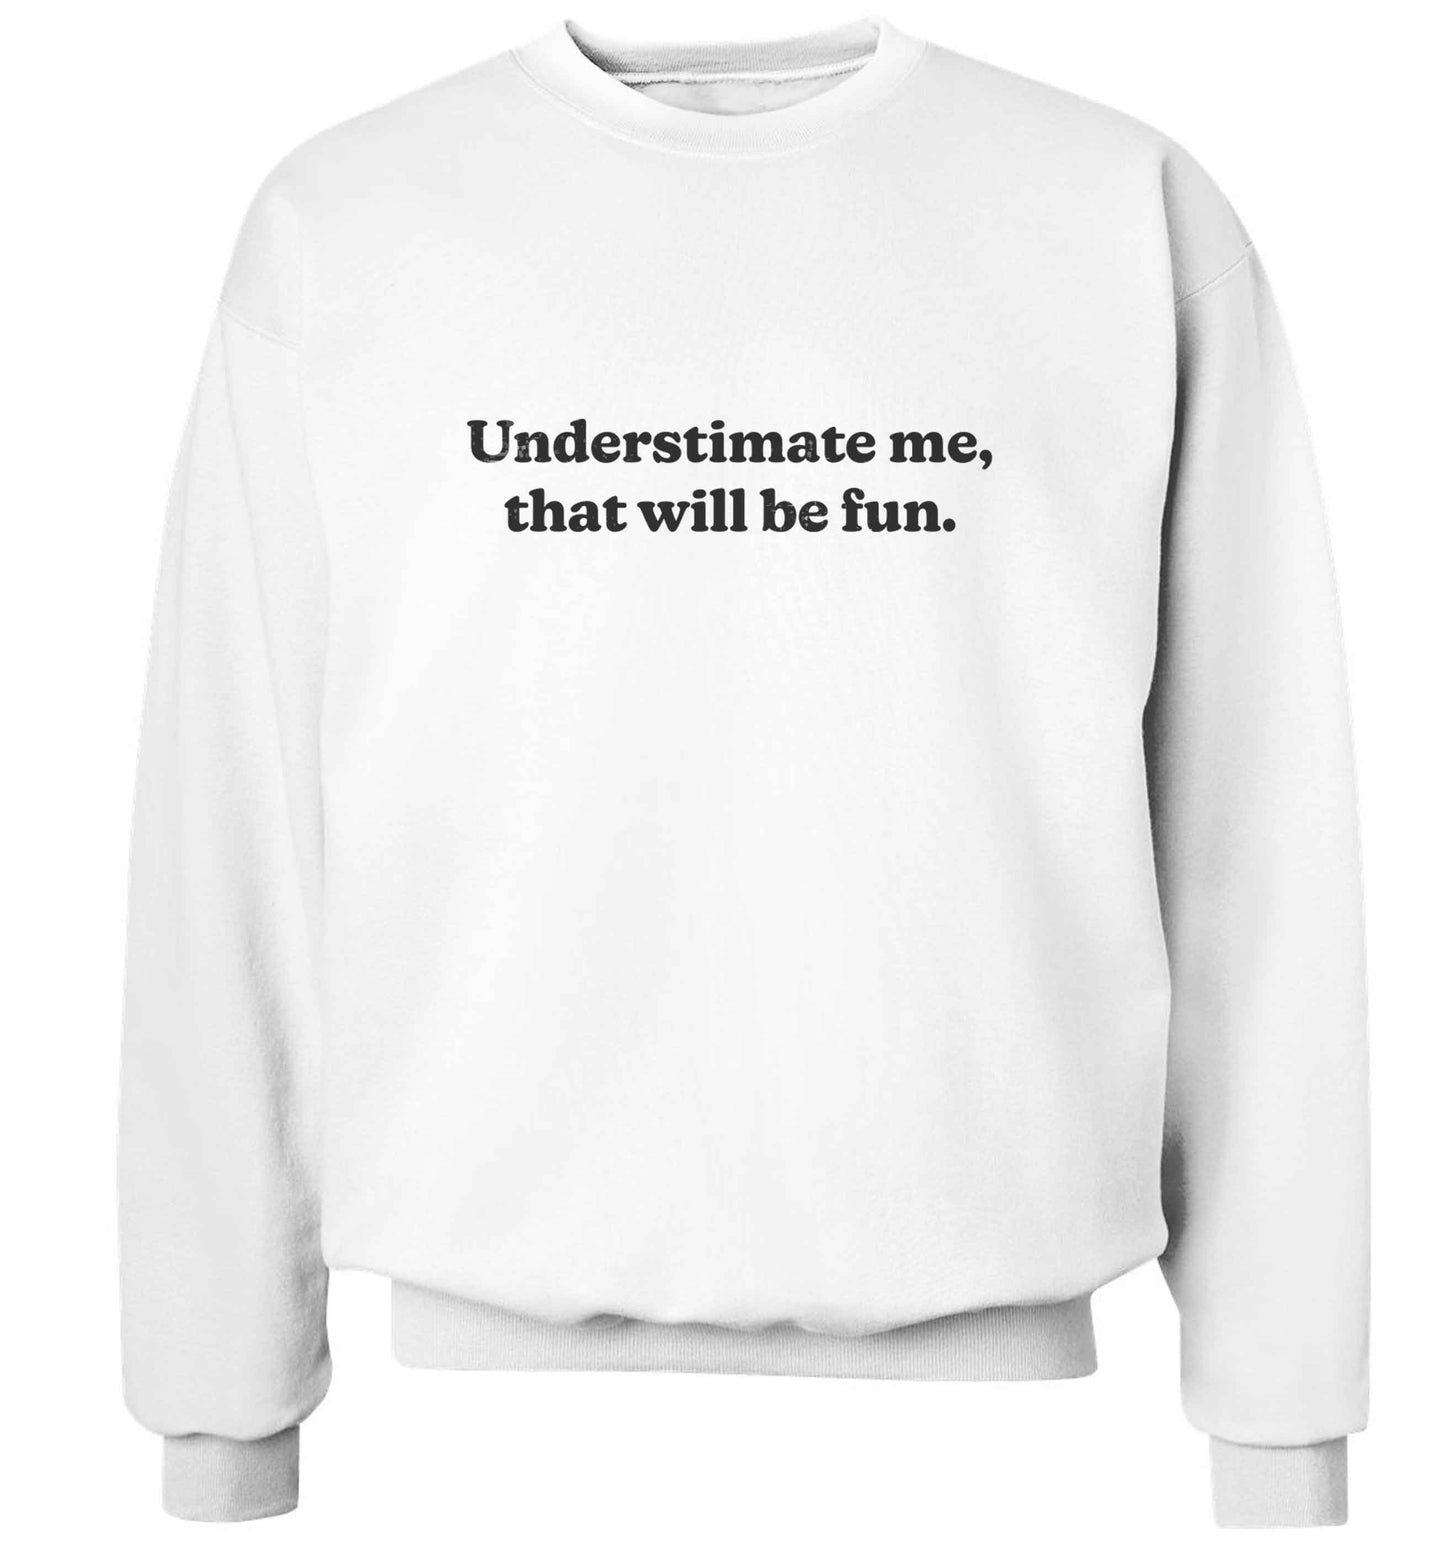 Underestimate me that will be fun adult's unisex white sweater 2XL